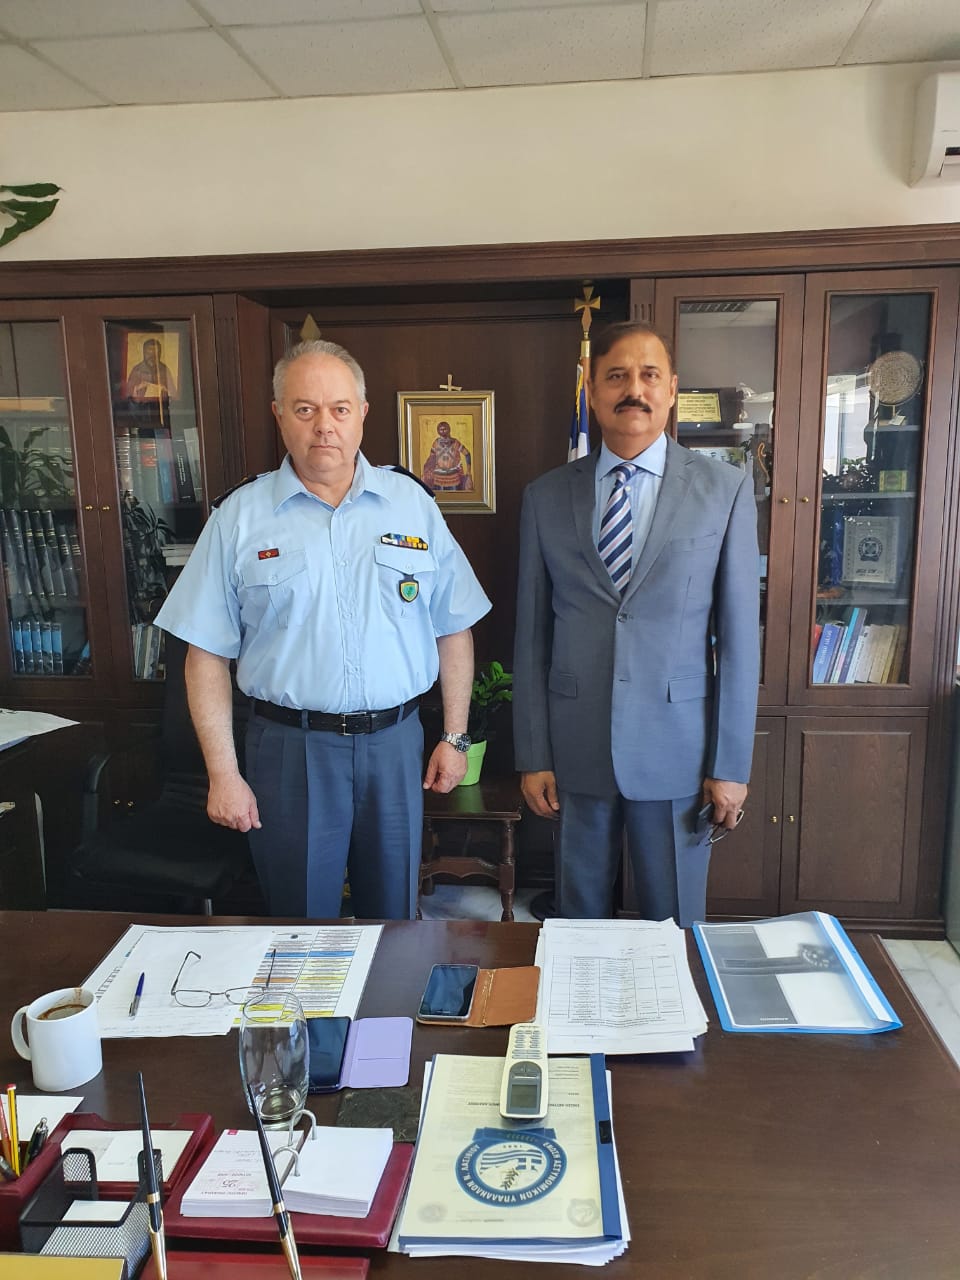 The Ambassador of Pakistan to Greece, met with General, Police Chief of Crete.